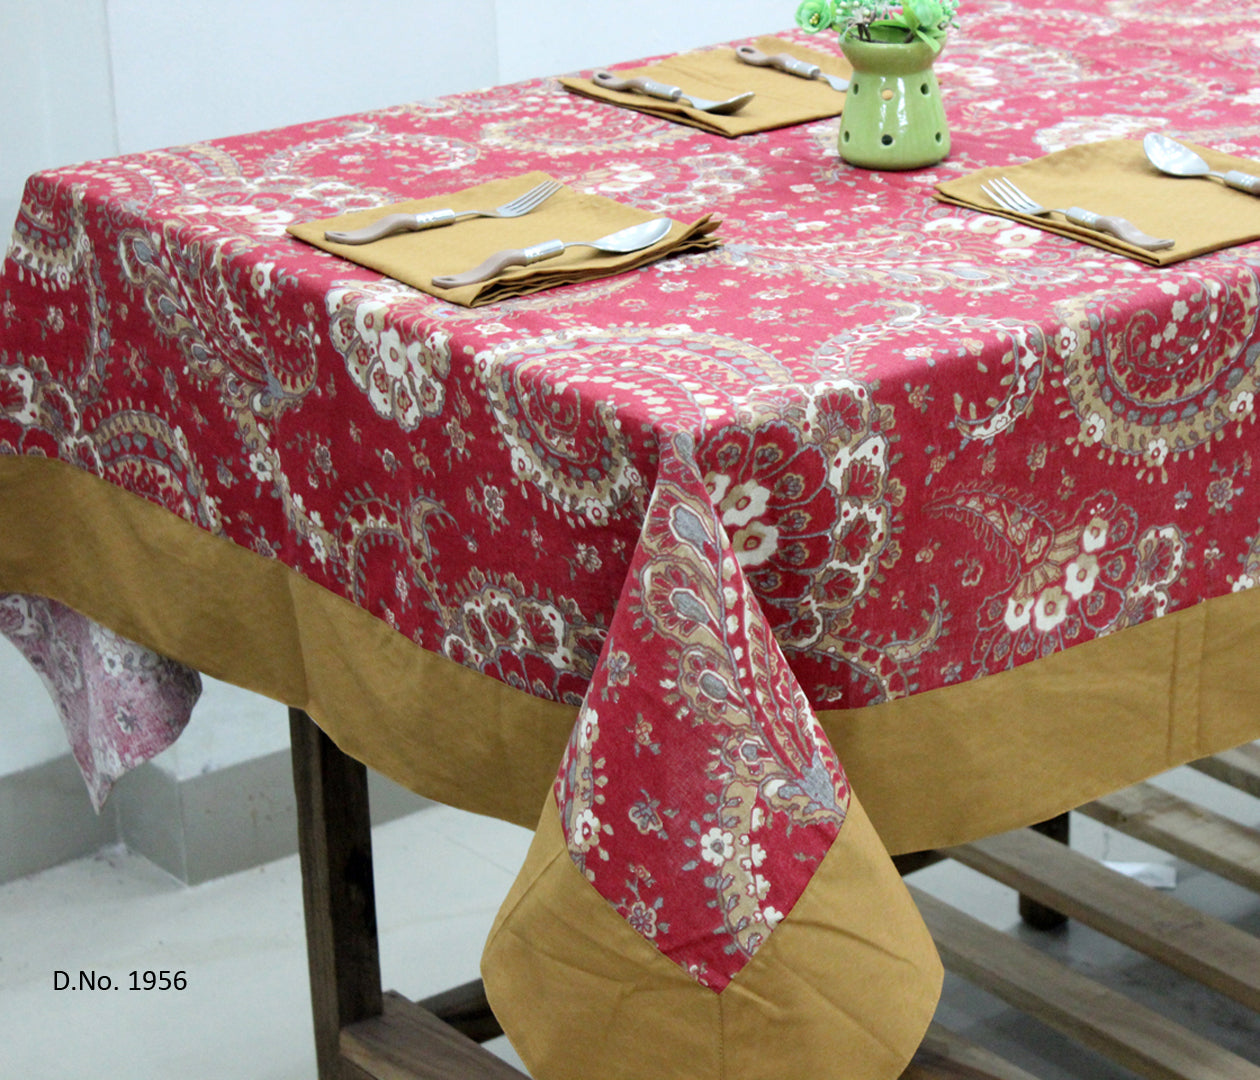 Prism Maroon Printed Cotton Paisley Table Cover(1 Pc) online in India